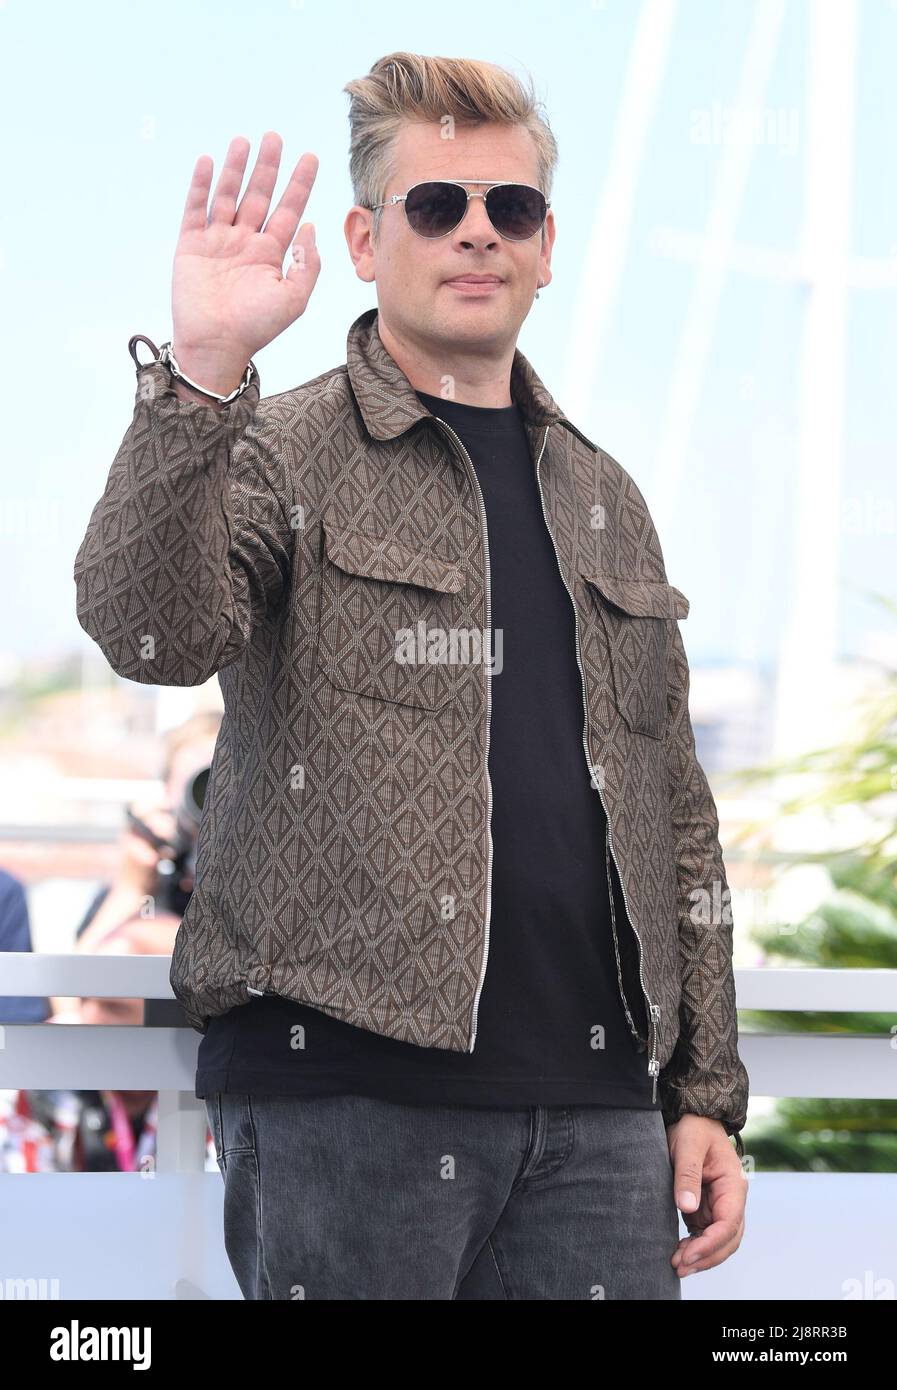 Cannes, France. 18th May, 2022. French singer Benjamin Biolay attends the Un Certain Regard jury photo call at Palais des Festivals at the 75th Cannes Film Festival, France on Wednesday, May 18, 2022. Photo by Rune Hellestad/ Credit: UPI/Alamy Live News Stock Photo